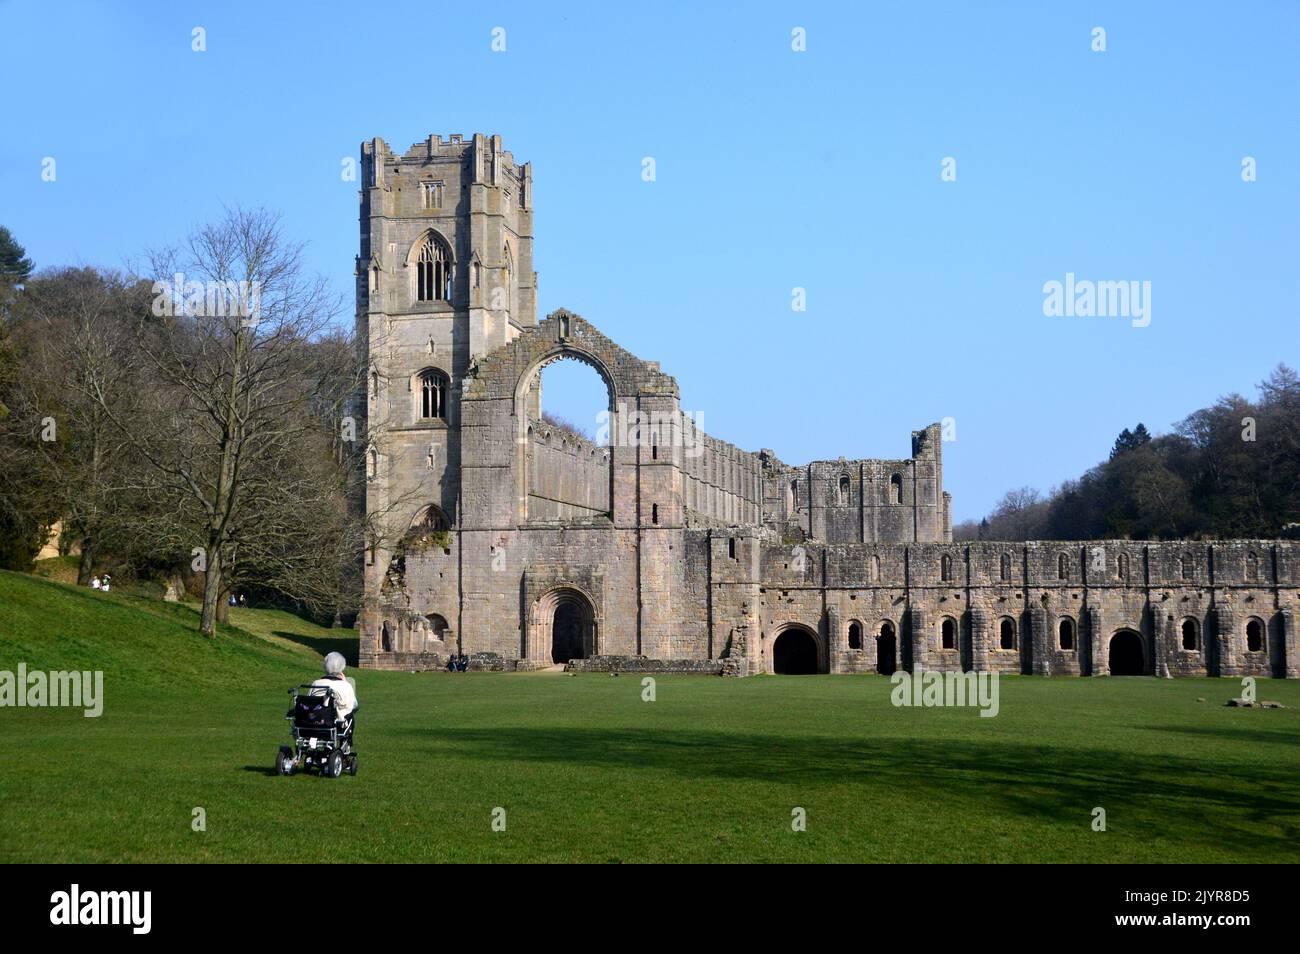 Woman in Wheelchair Looking at the Ruins of the Chapel & Bell Tower at Fountains Abbey and Studley Royal Water Garden, North Yorkshire, England, UK. Stock Photo